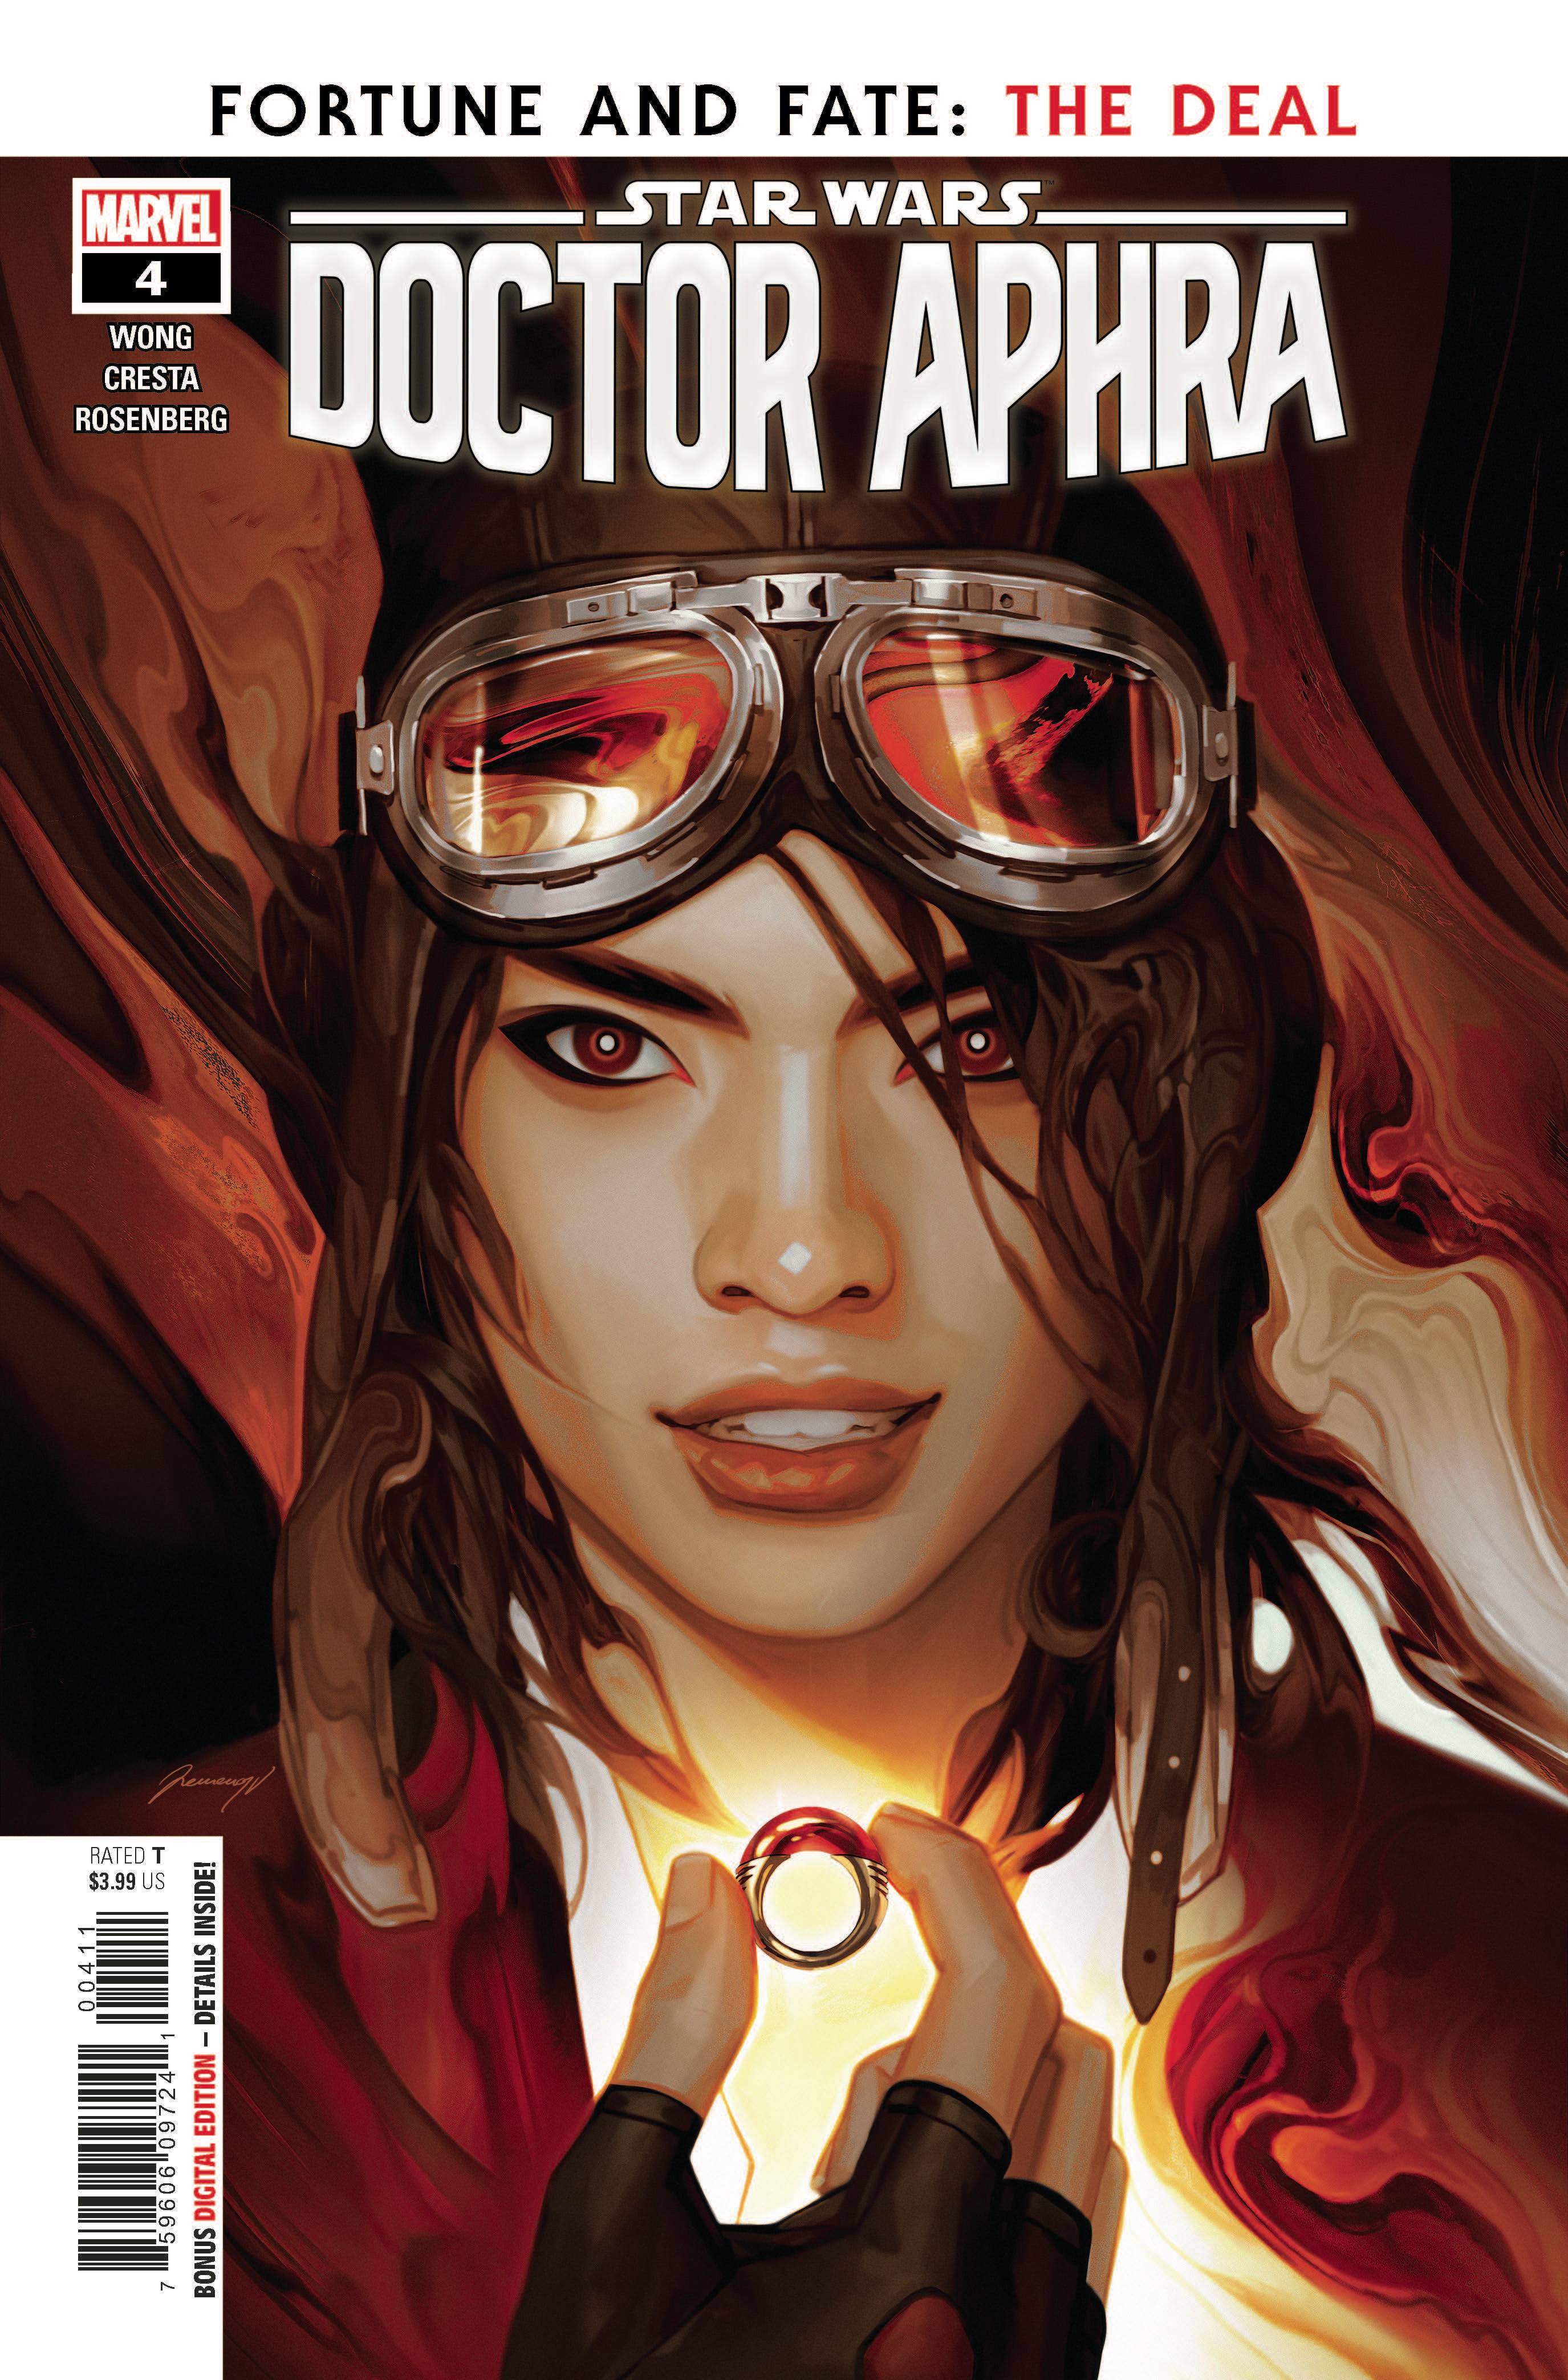 STAR WARS DOCTOR APHRA #4 | Game Master's Emporium (The New GME)